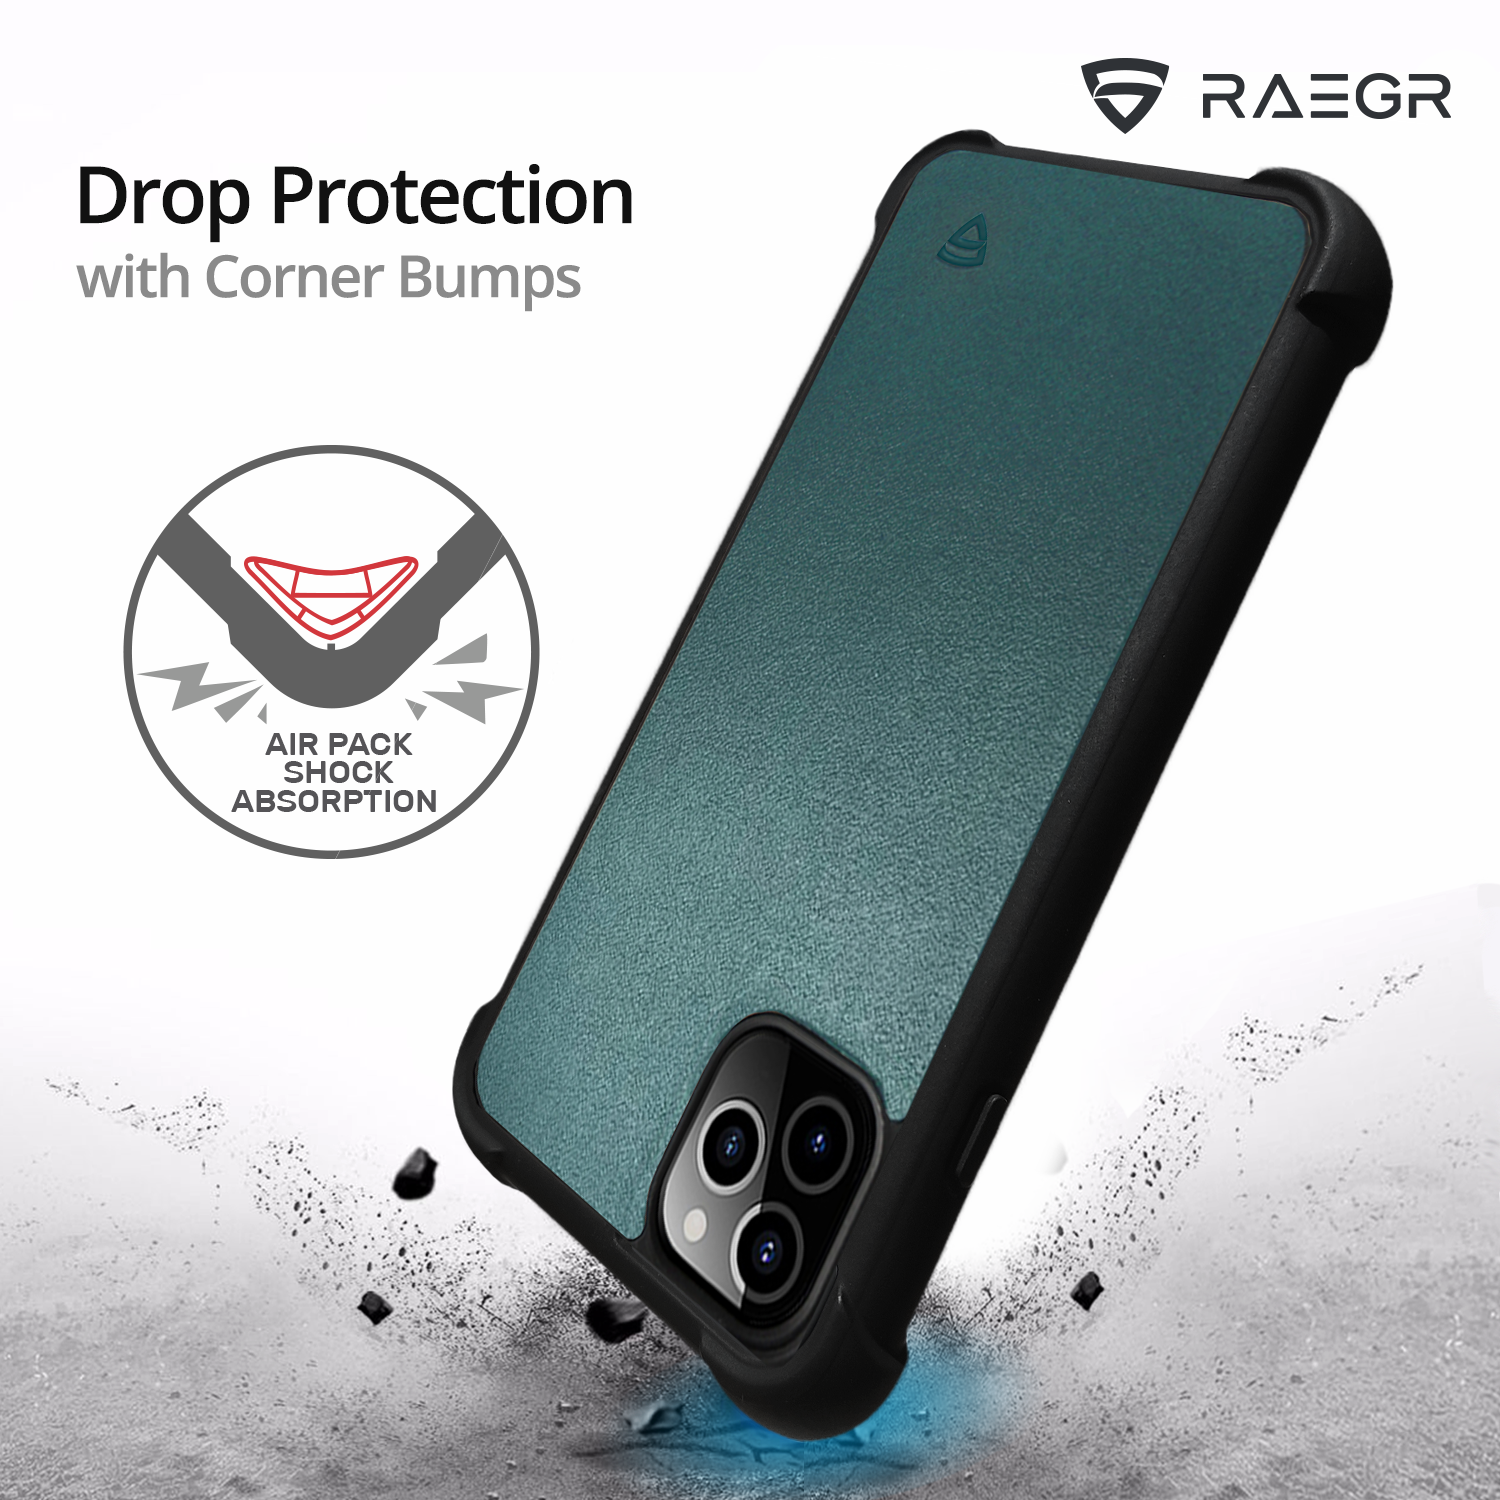 RAEGR iPhone 11 Pro Max Elements Armor Protective Case/Cover with Genuine Leather